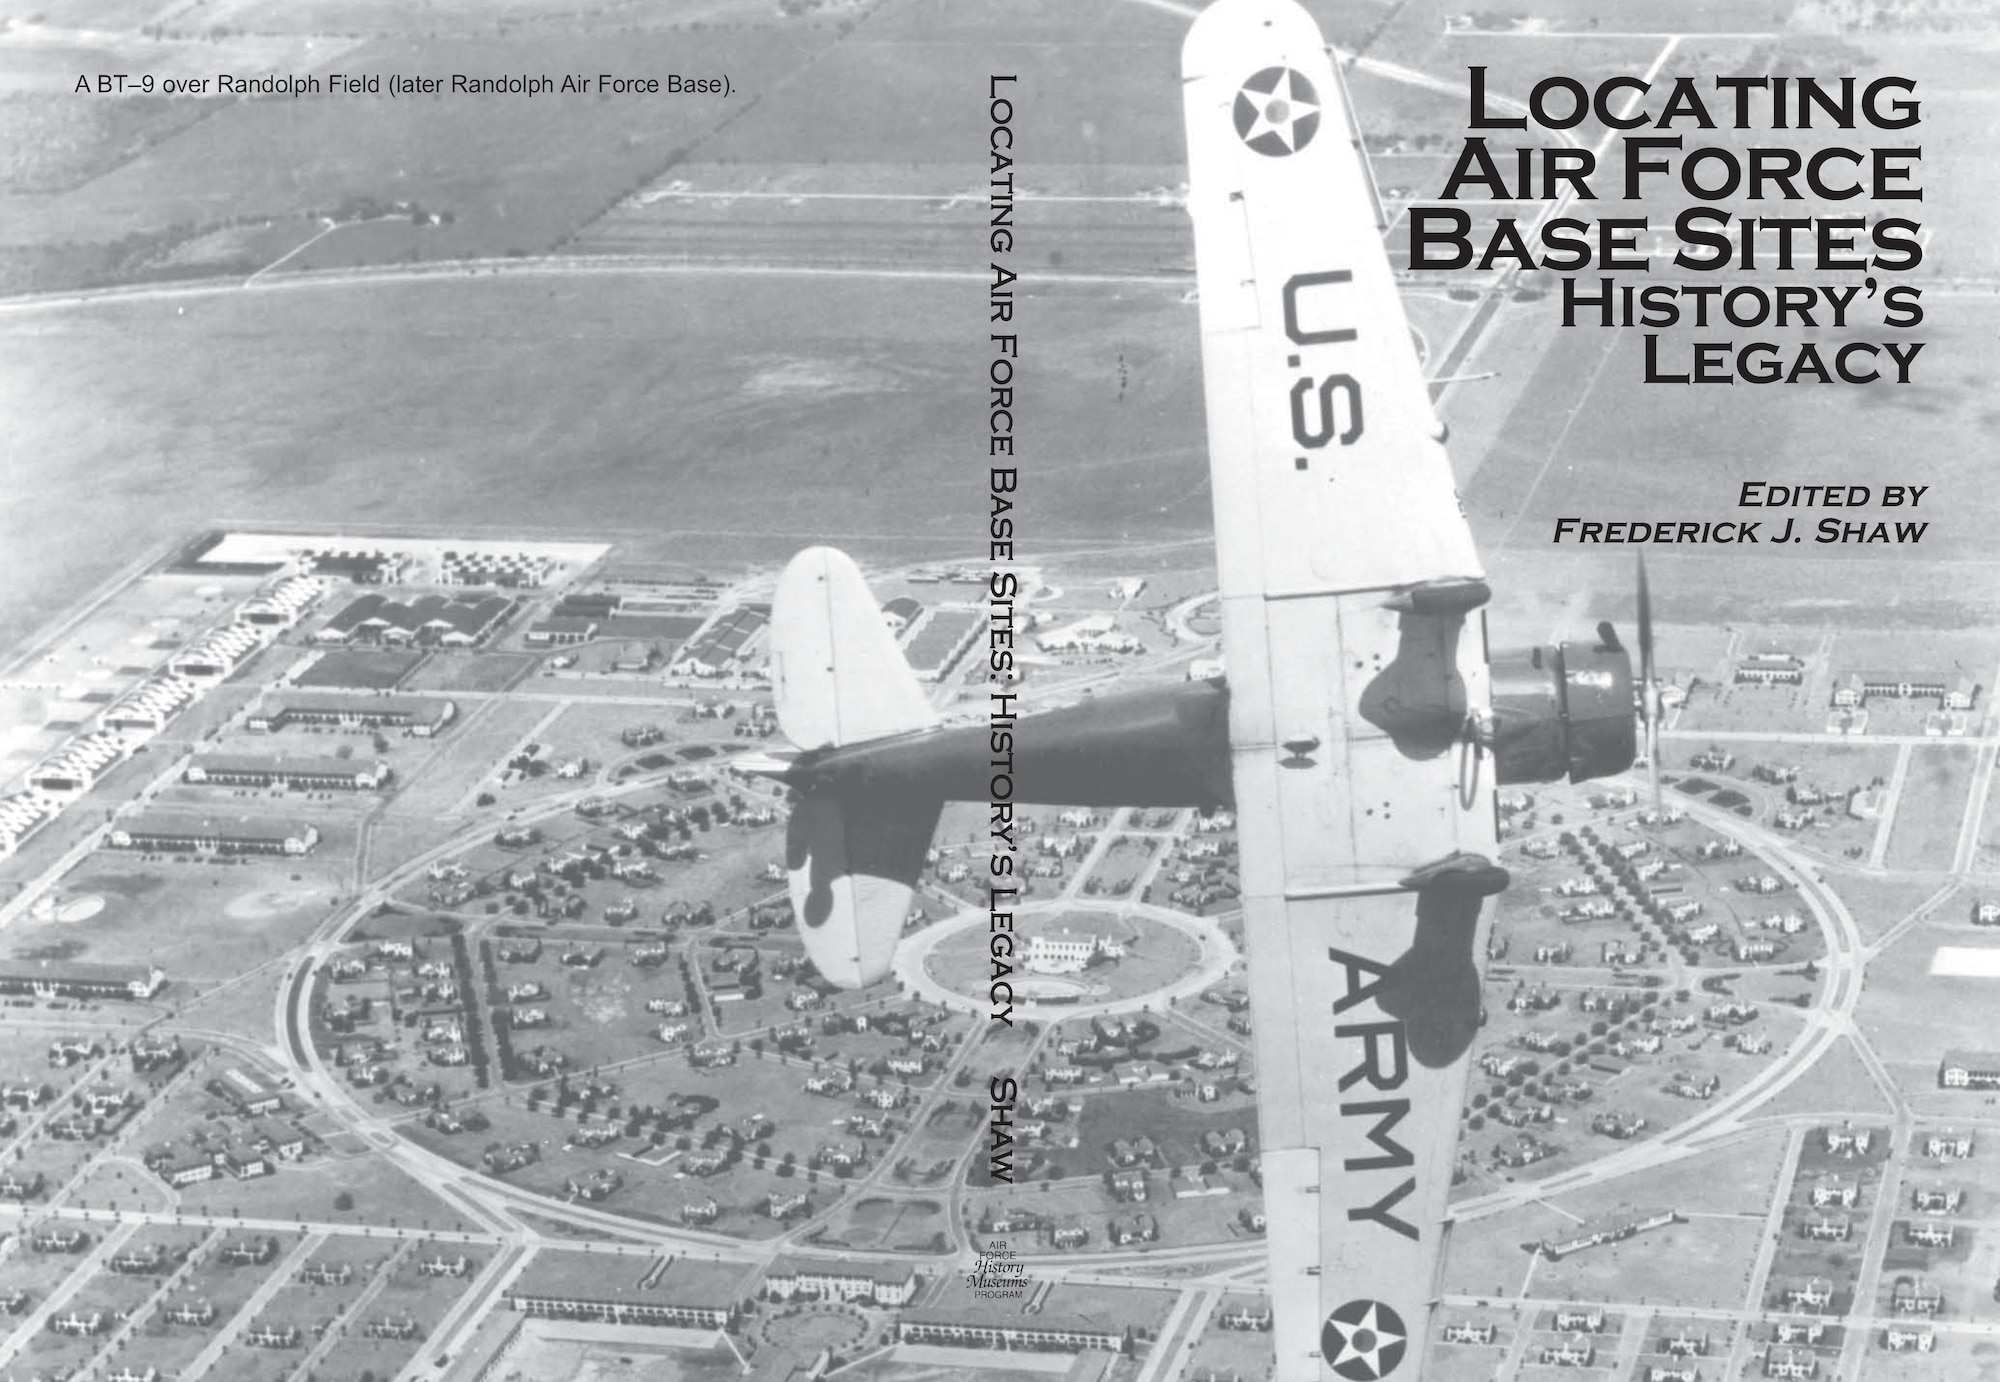 Locating Air Force Base Sites: History's Legacy. Edited by Frederick J. Shaw. The updated edition adds chapter 5 on the Base Realignment and Closure Commission, 2005, and chapter 6 on the Joint Basing Initiative.